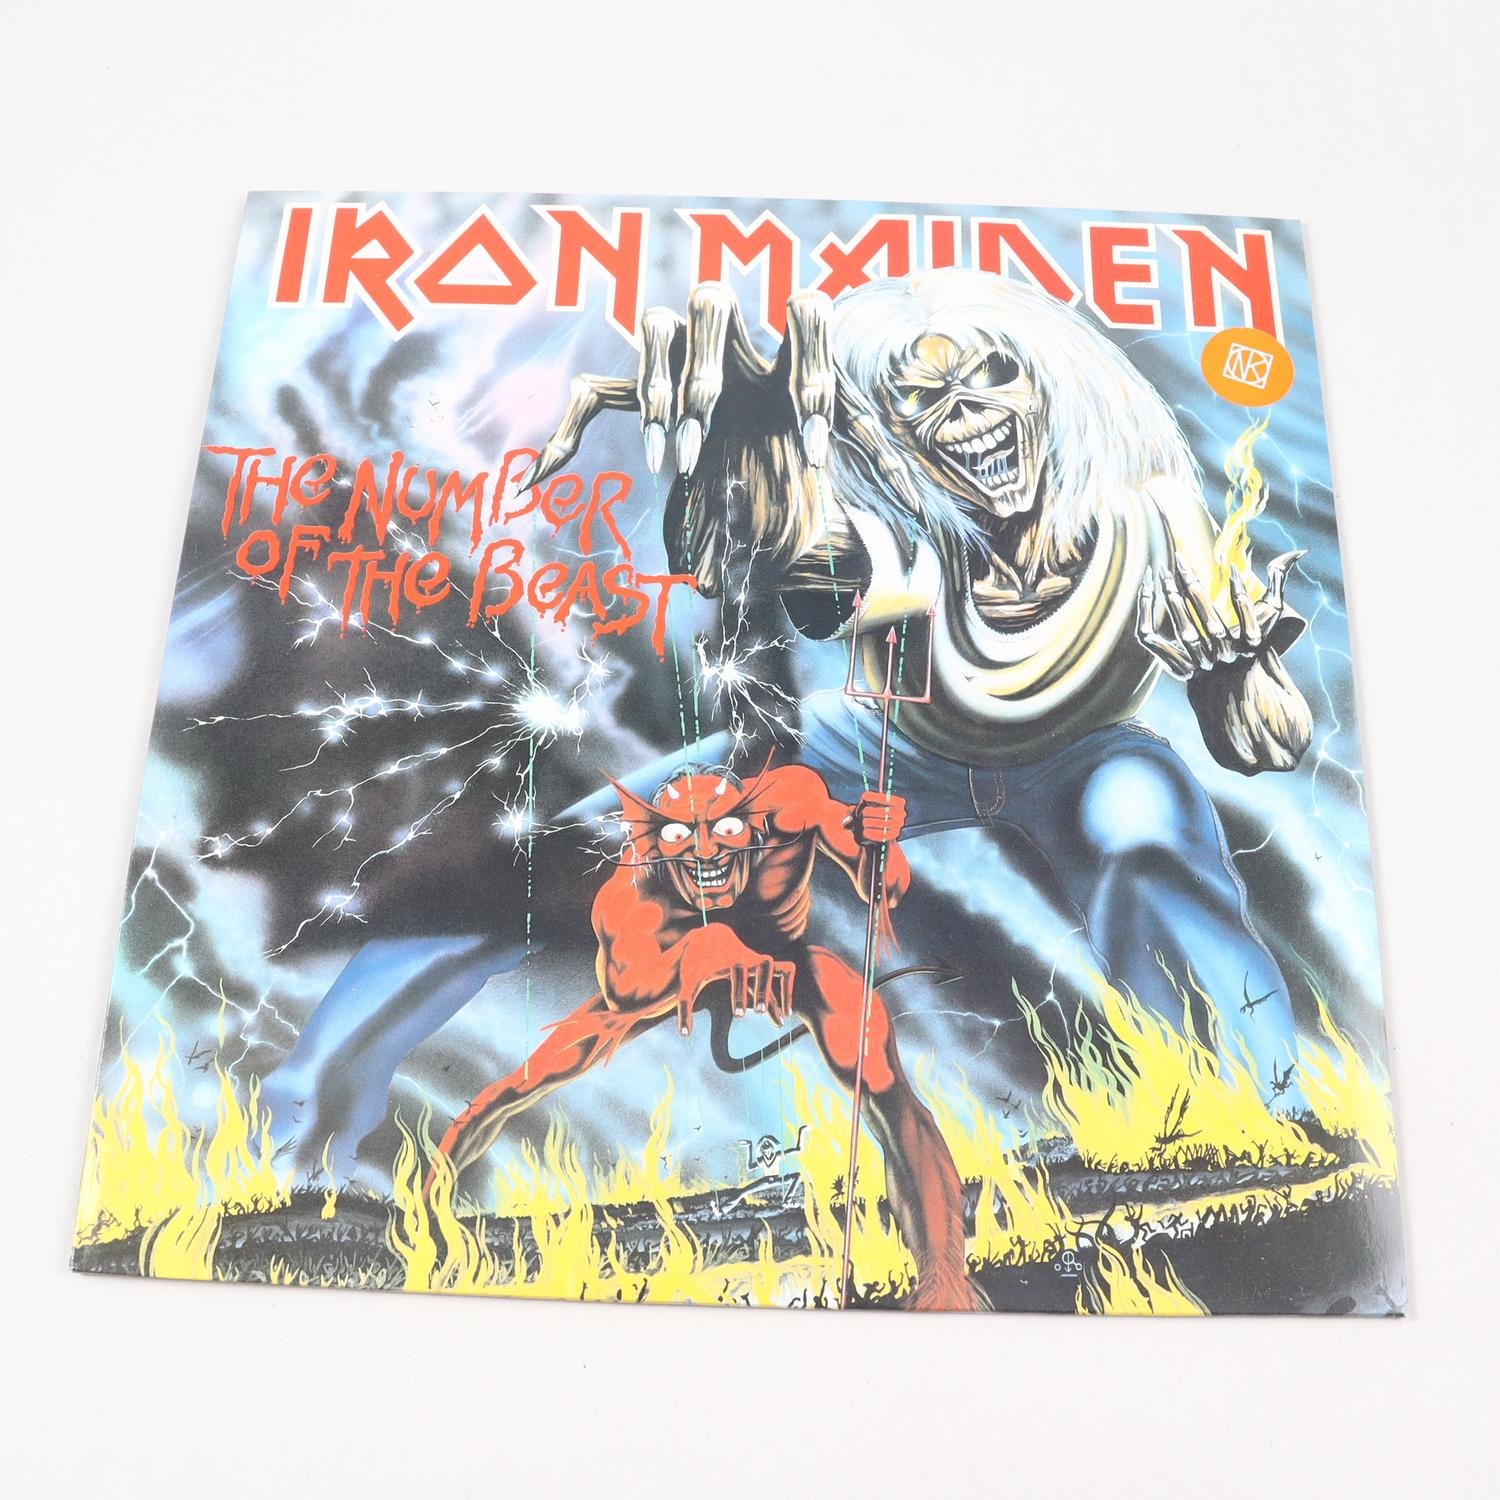 LP Iron Maiden, The Number Of The Beast